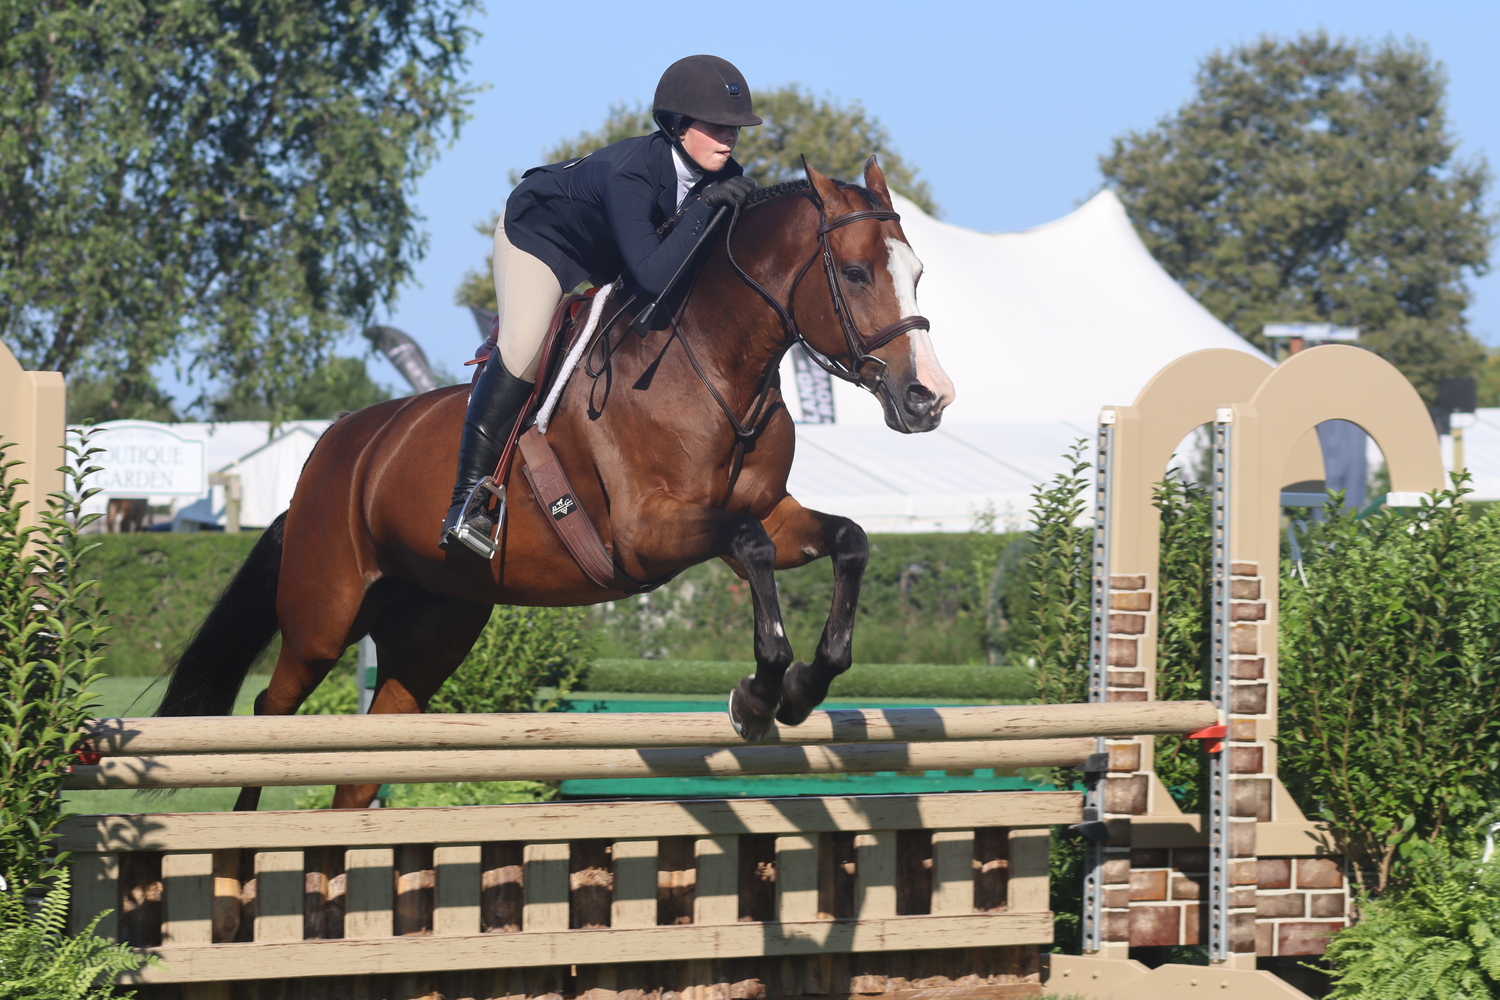 Southampton resident Paige Mattingly and her horse, Karla, in the local junior hunter division. CAILIN RILEY